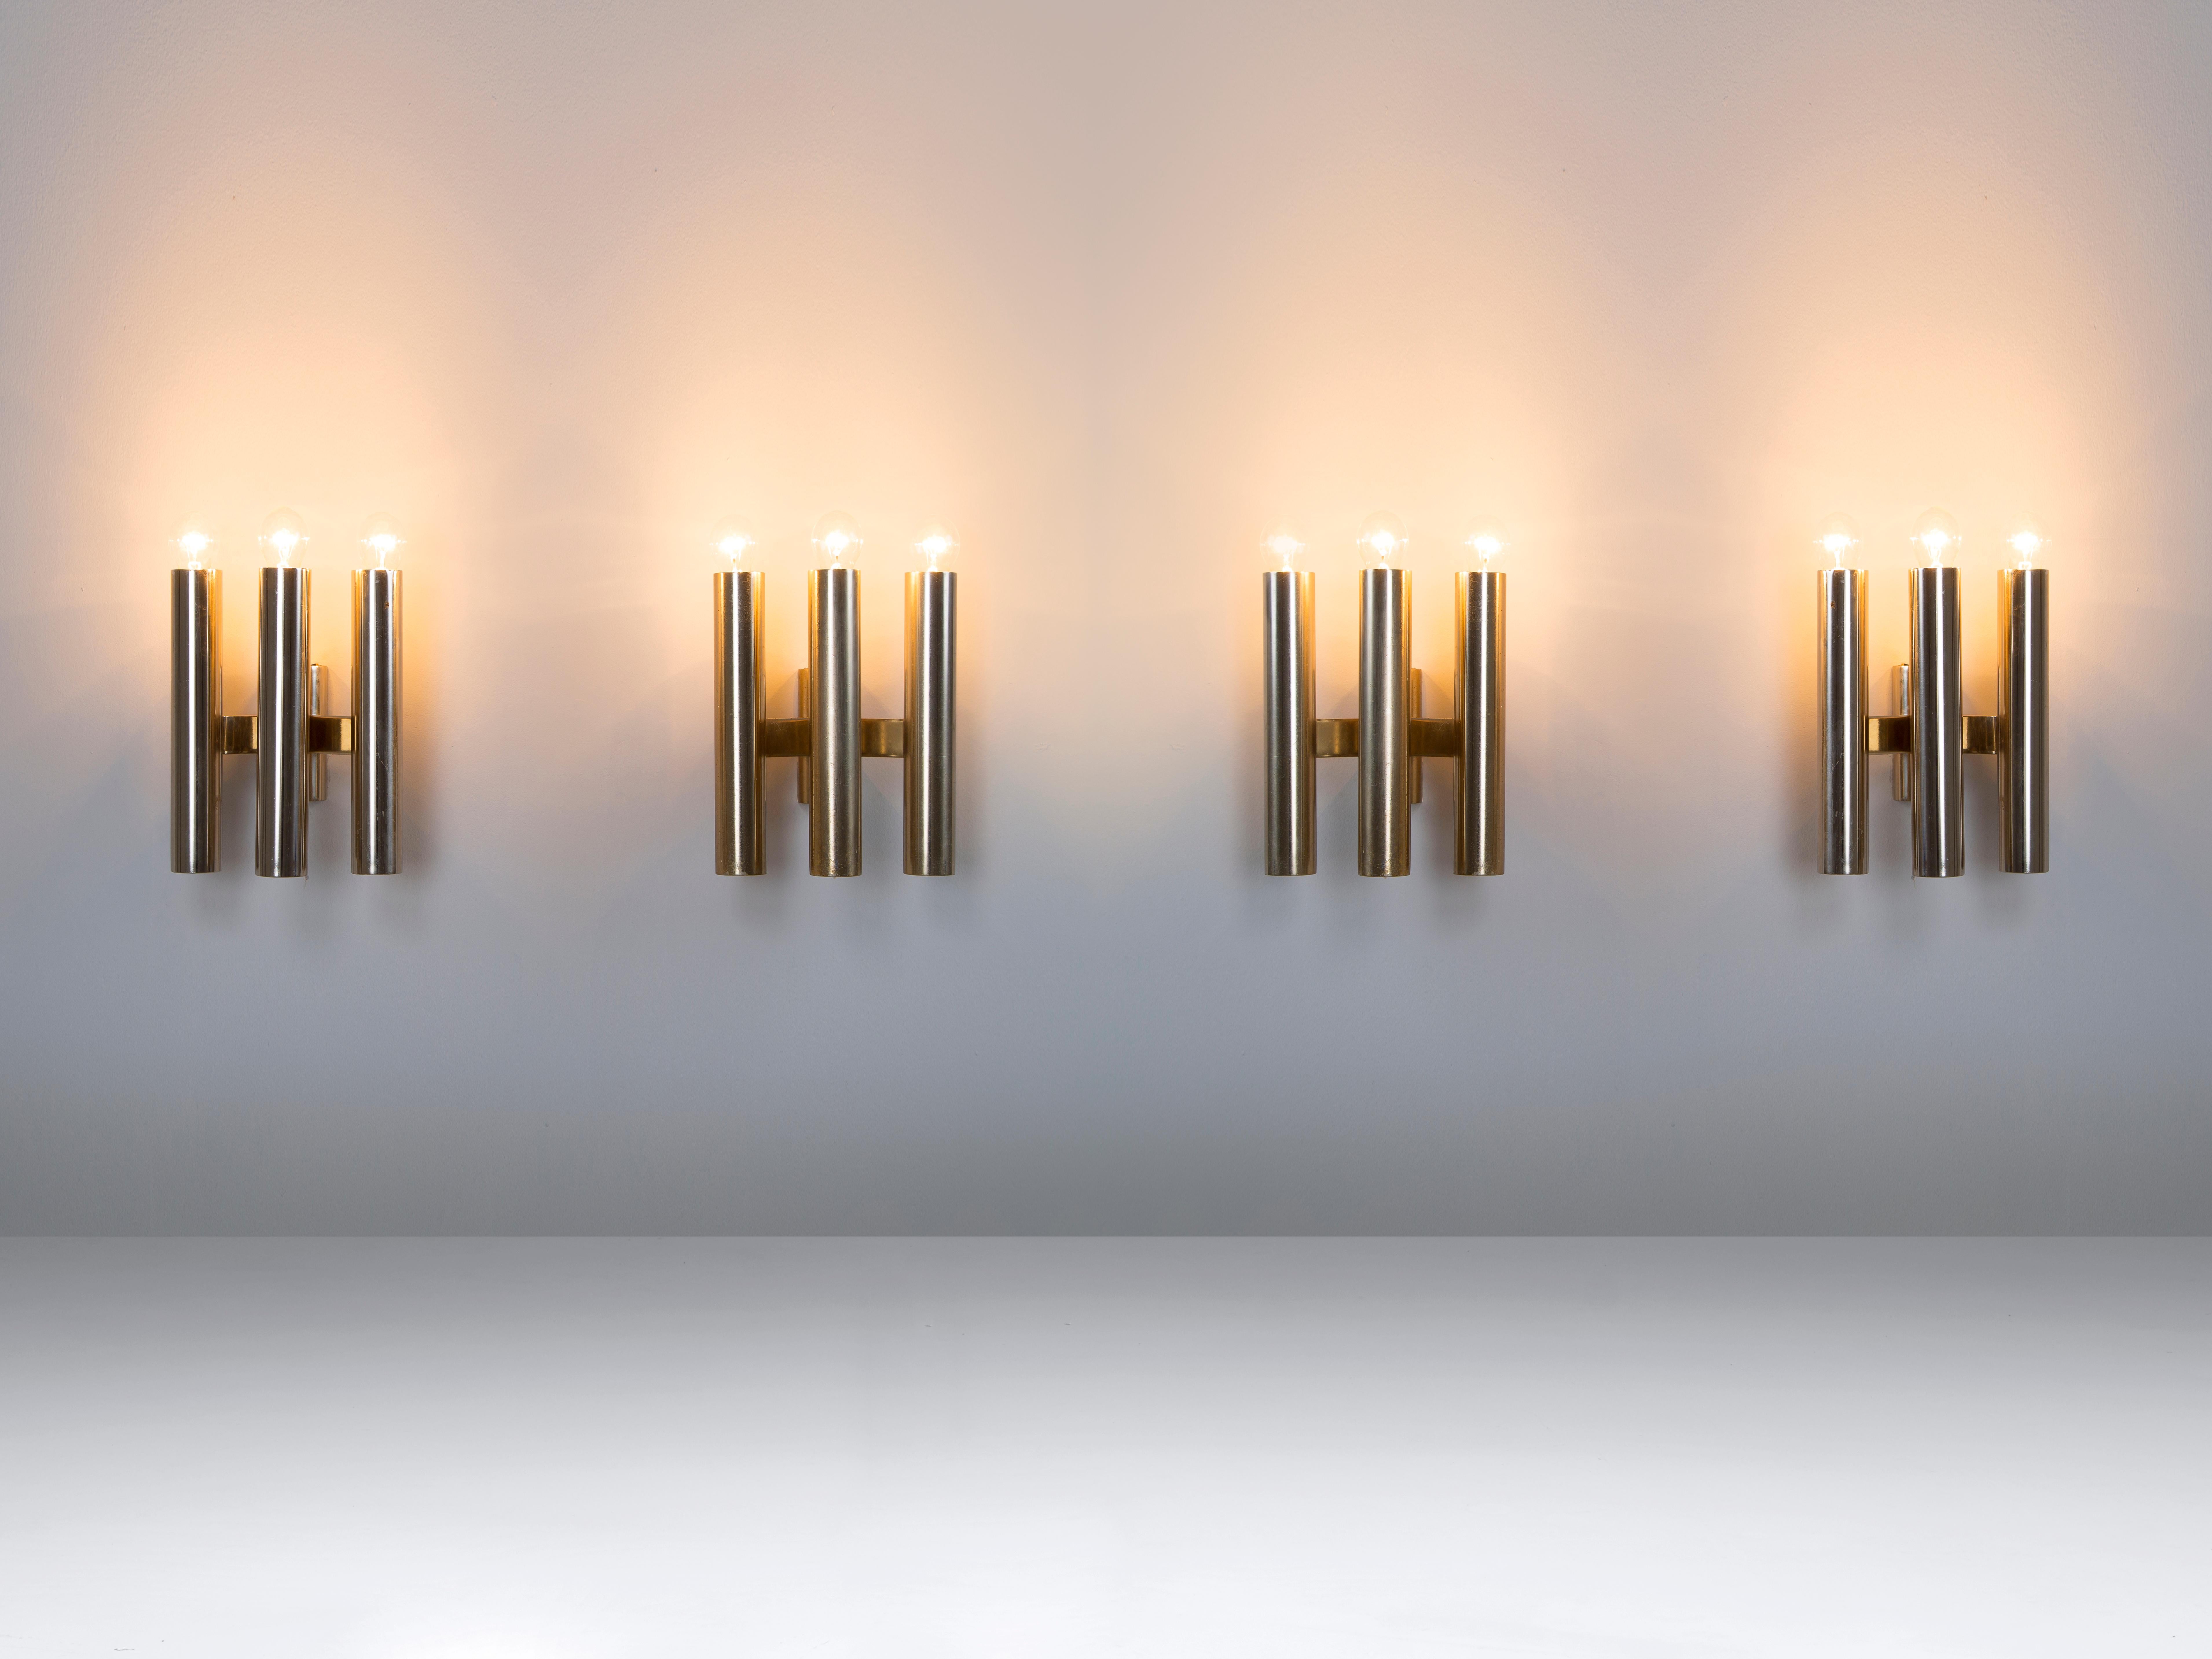 Wall lights, chromed metal, Europe, 1970s.

Set of wall lights. Each light consist of three cylindrical chrome candle holder inspired tubes which are held by a chrome frame. The alignment of these three lights are formed in a triangle composition,